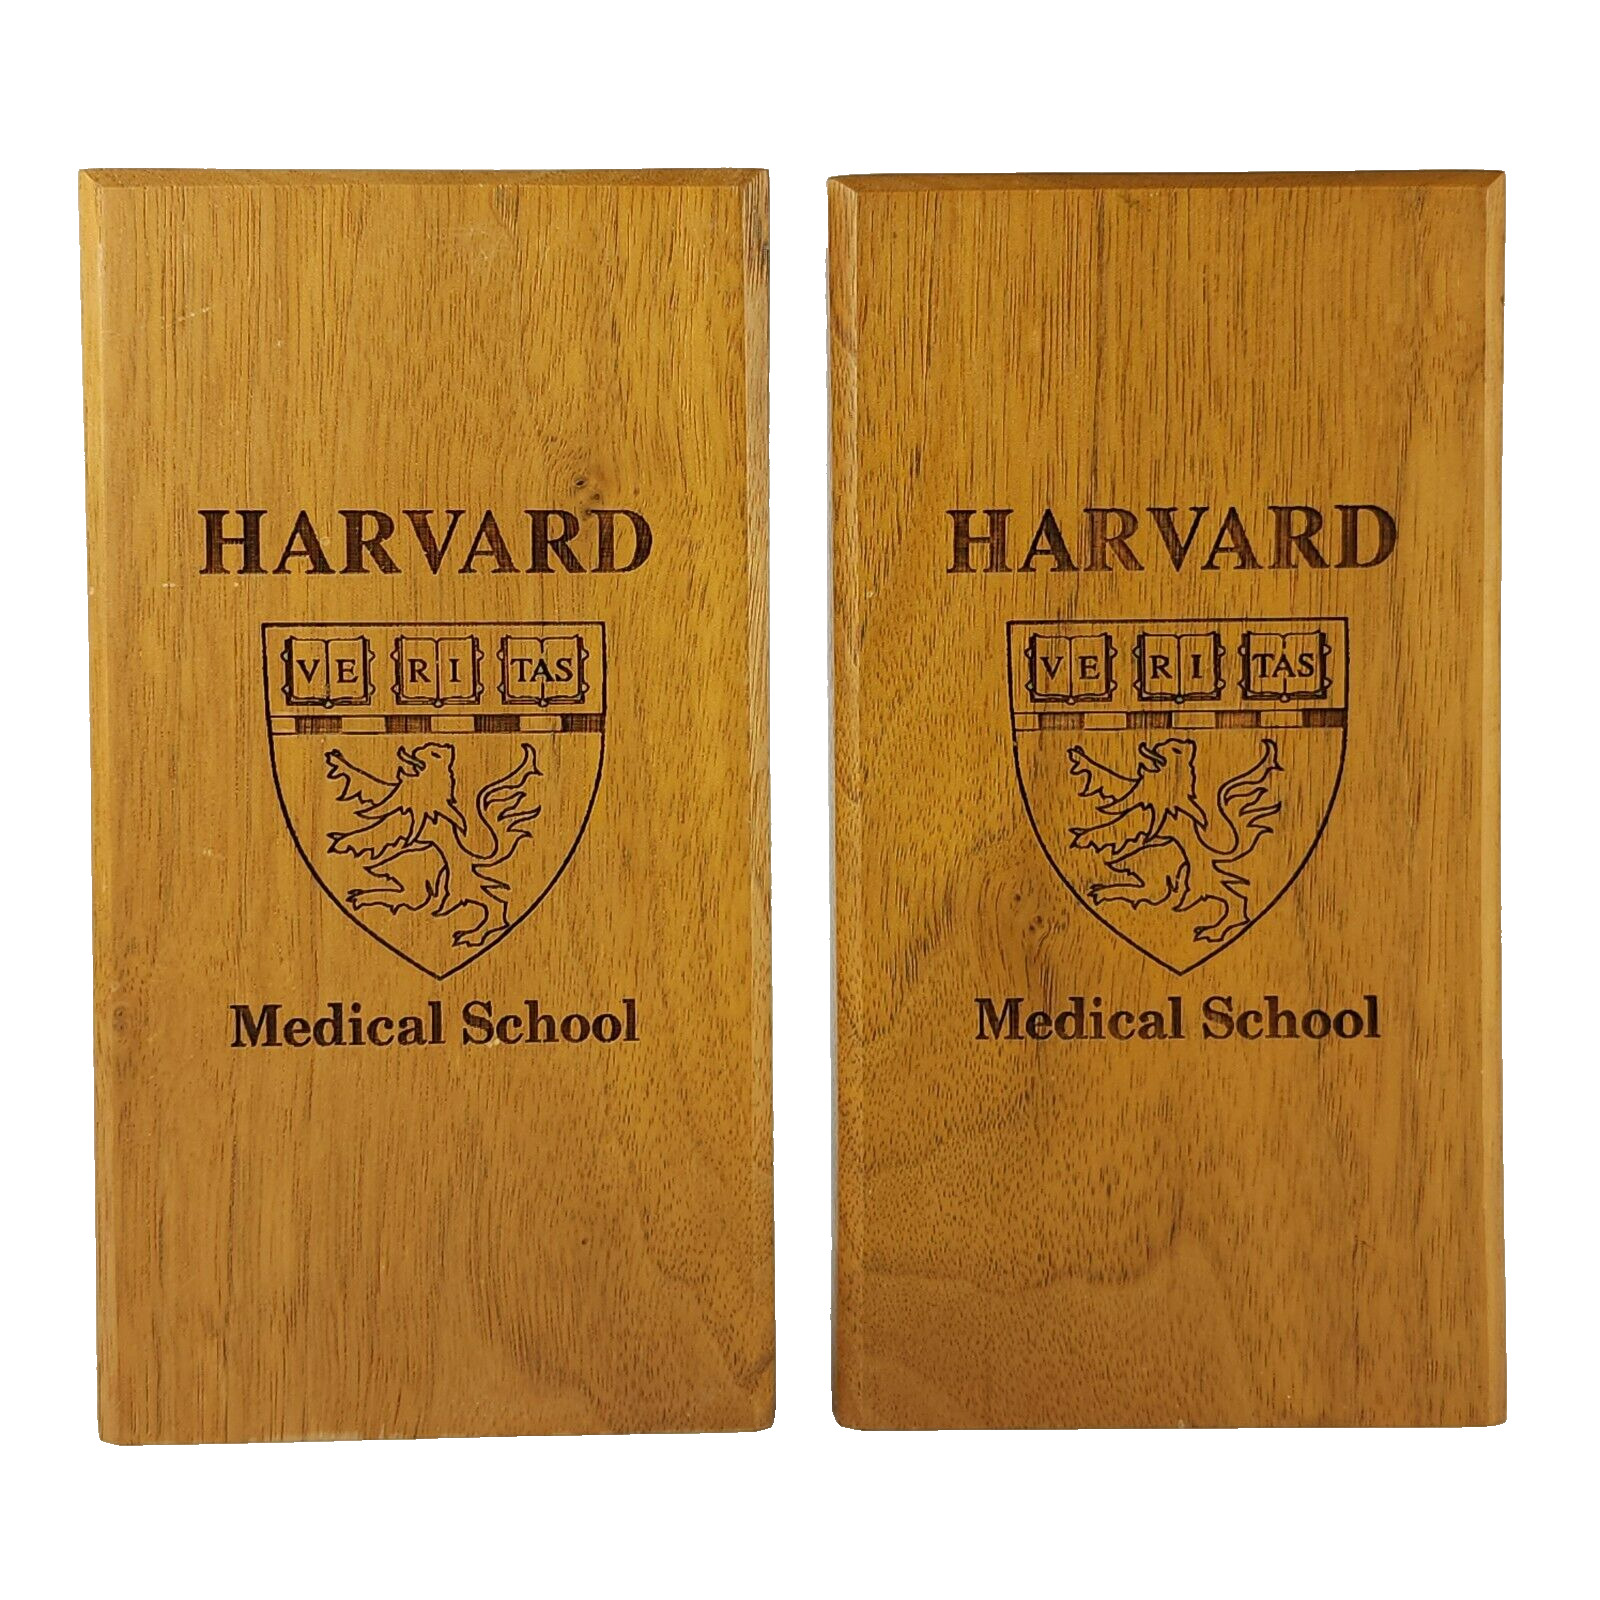 Harvard Medical School Wooden Bookends Engraved Emblem Wood READ ALL AS-IS